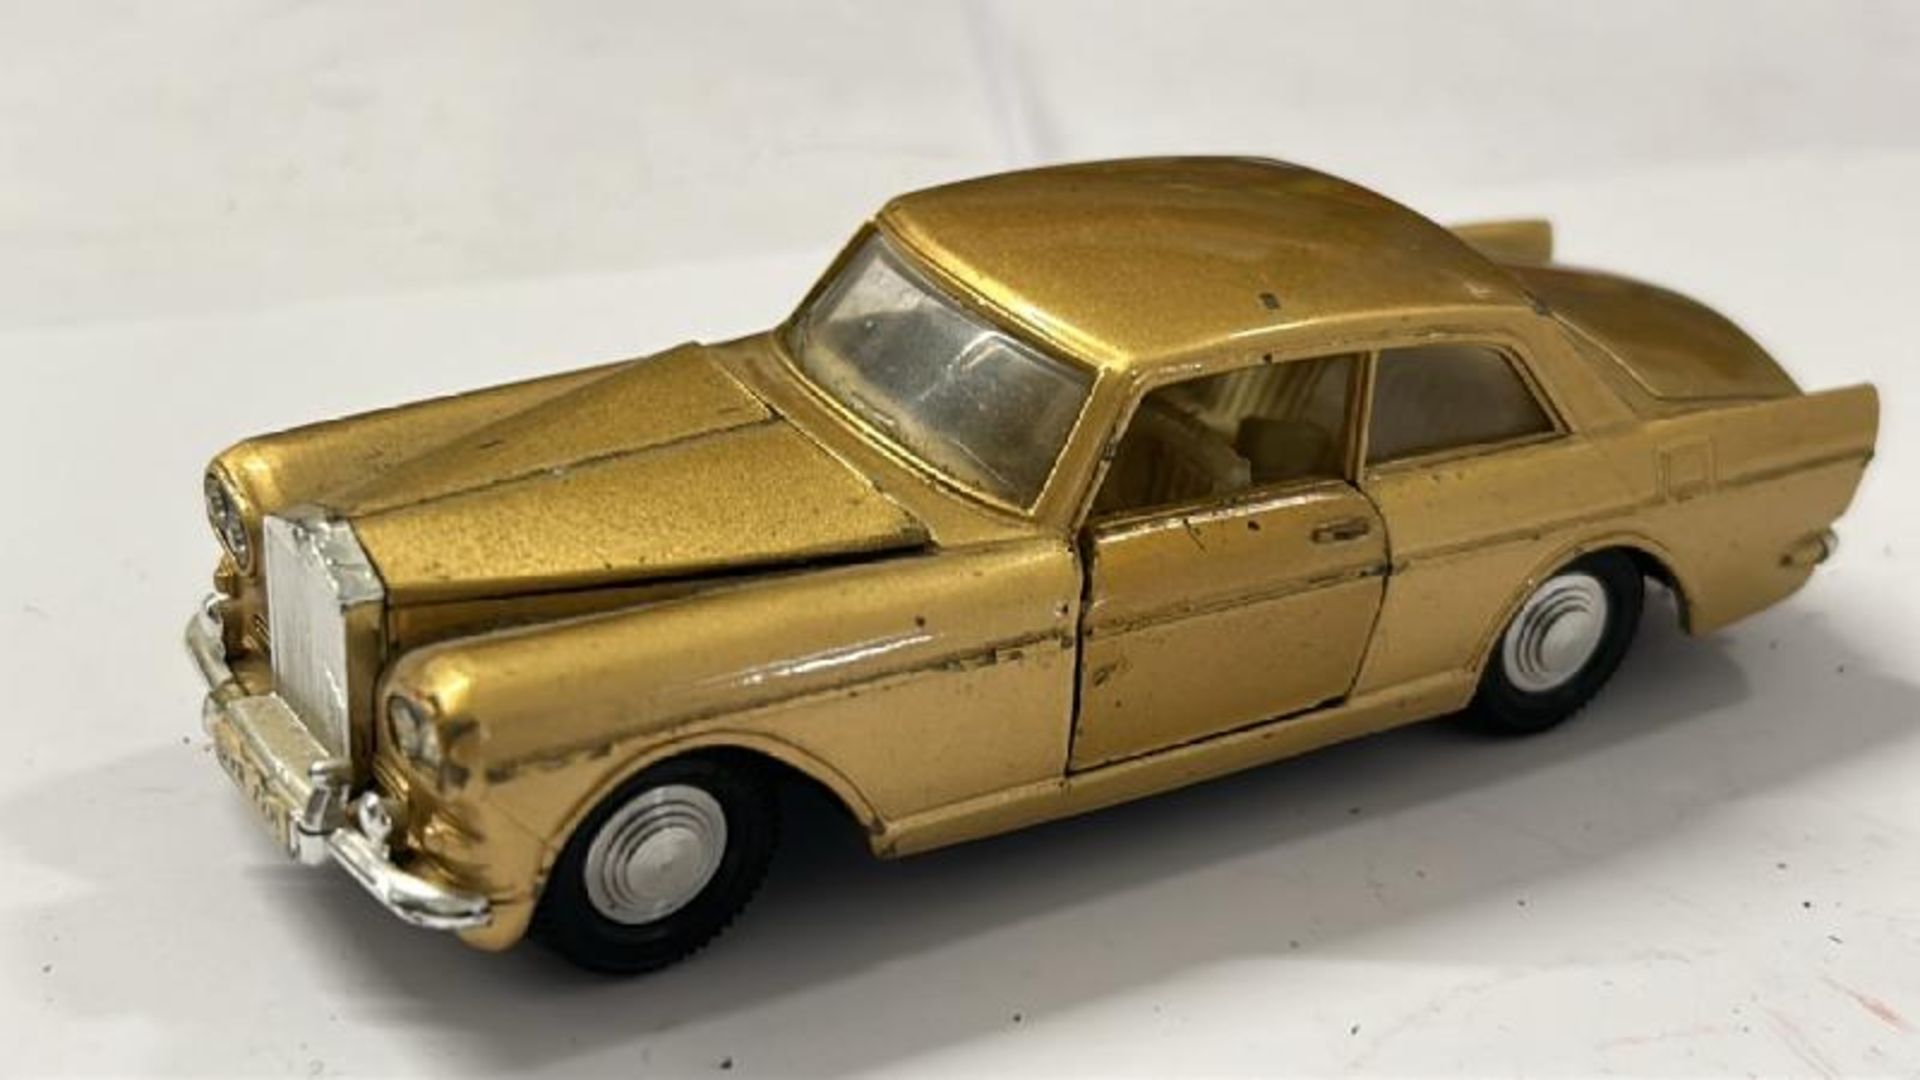 Unboxed Dinky & Corgi cars and caravans including Corgi Silver Shadow Rolls Royce and Dinky Rolls - Image 12 of 23